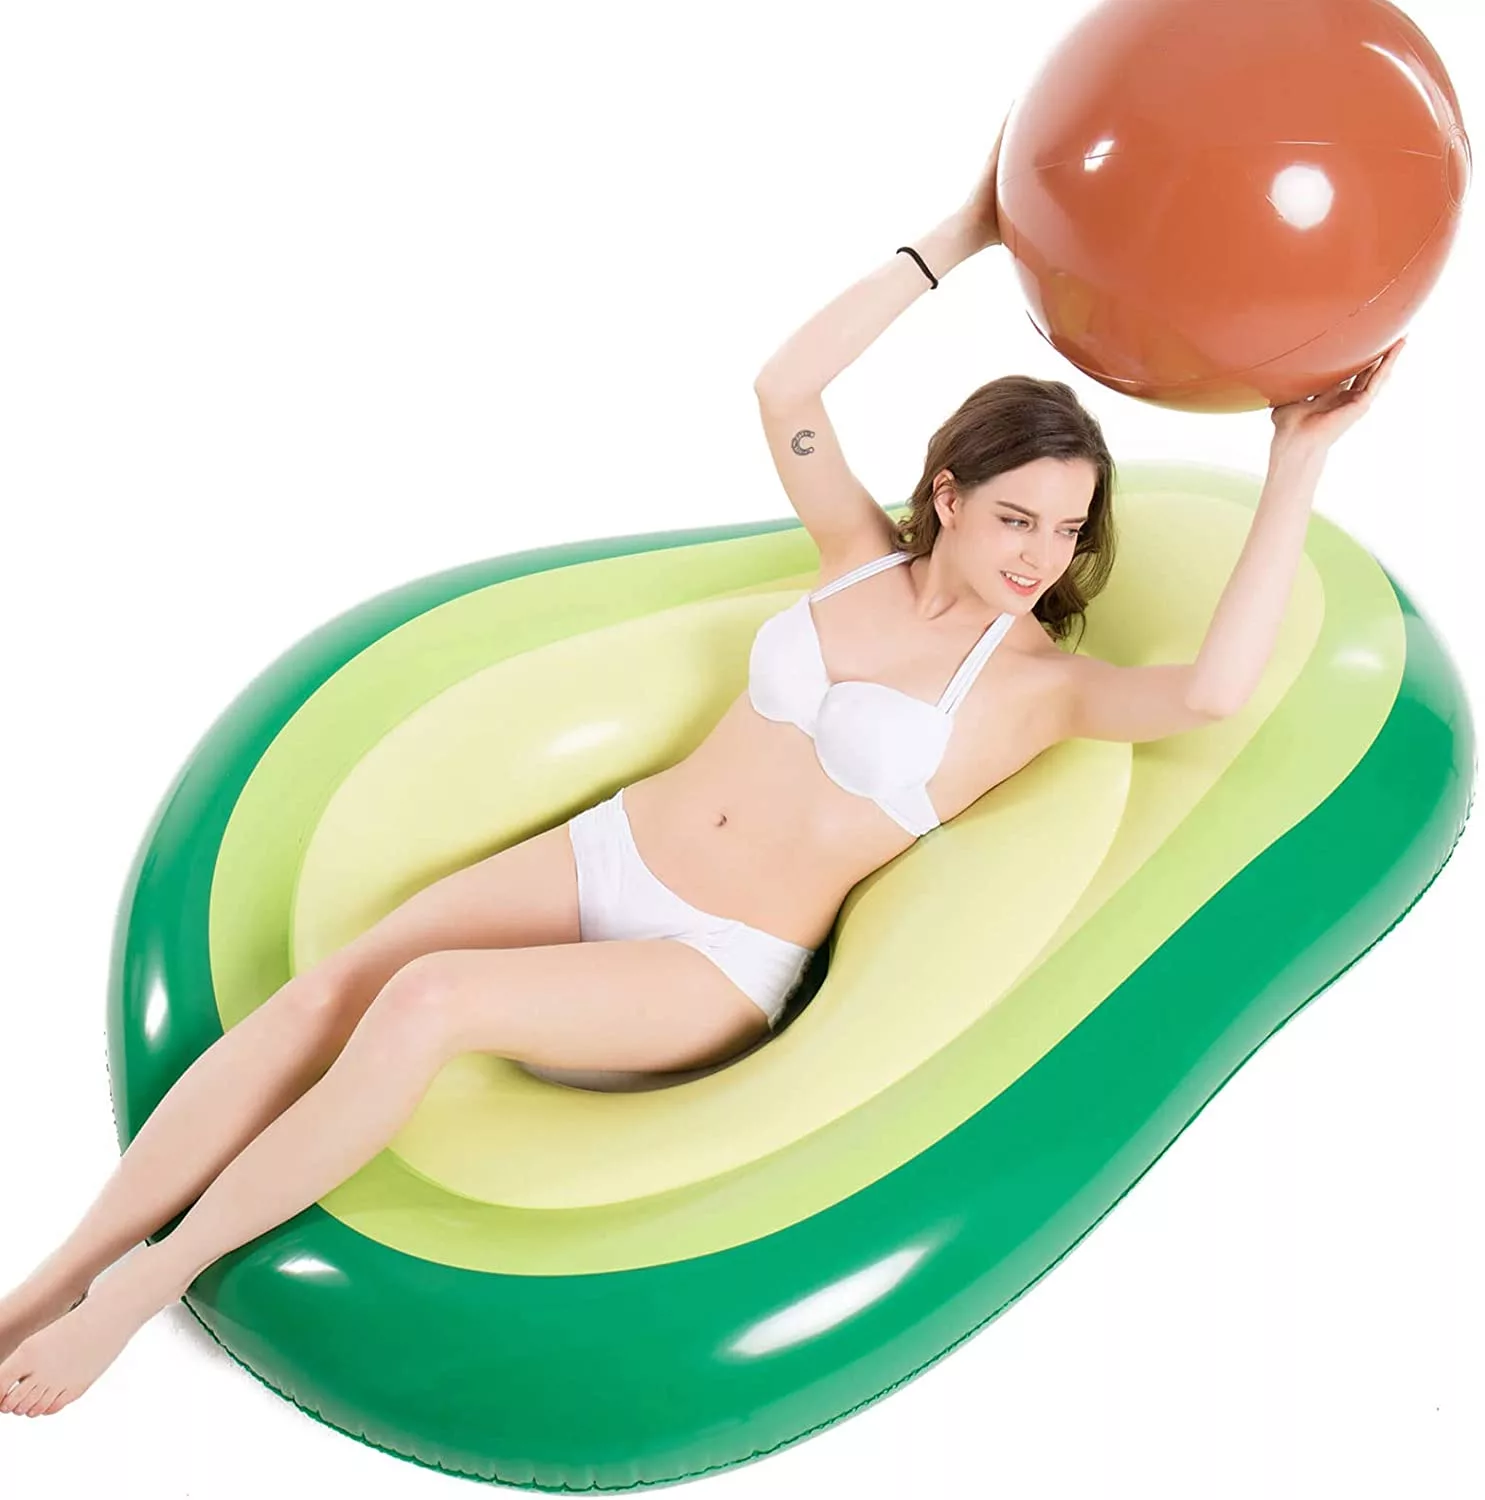 Woman Laying In Avocado Pool Float With Removable Pit Holding Removable Pit Ball